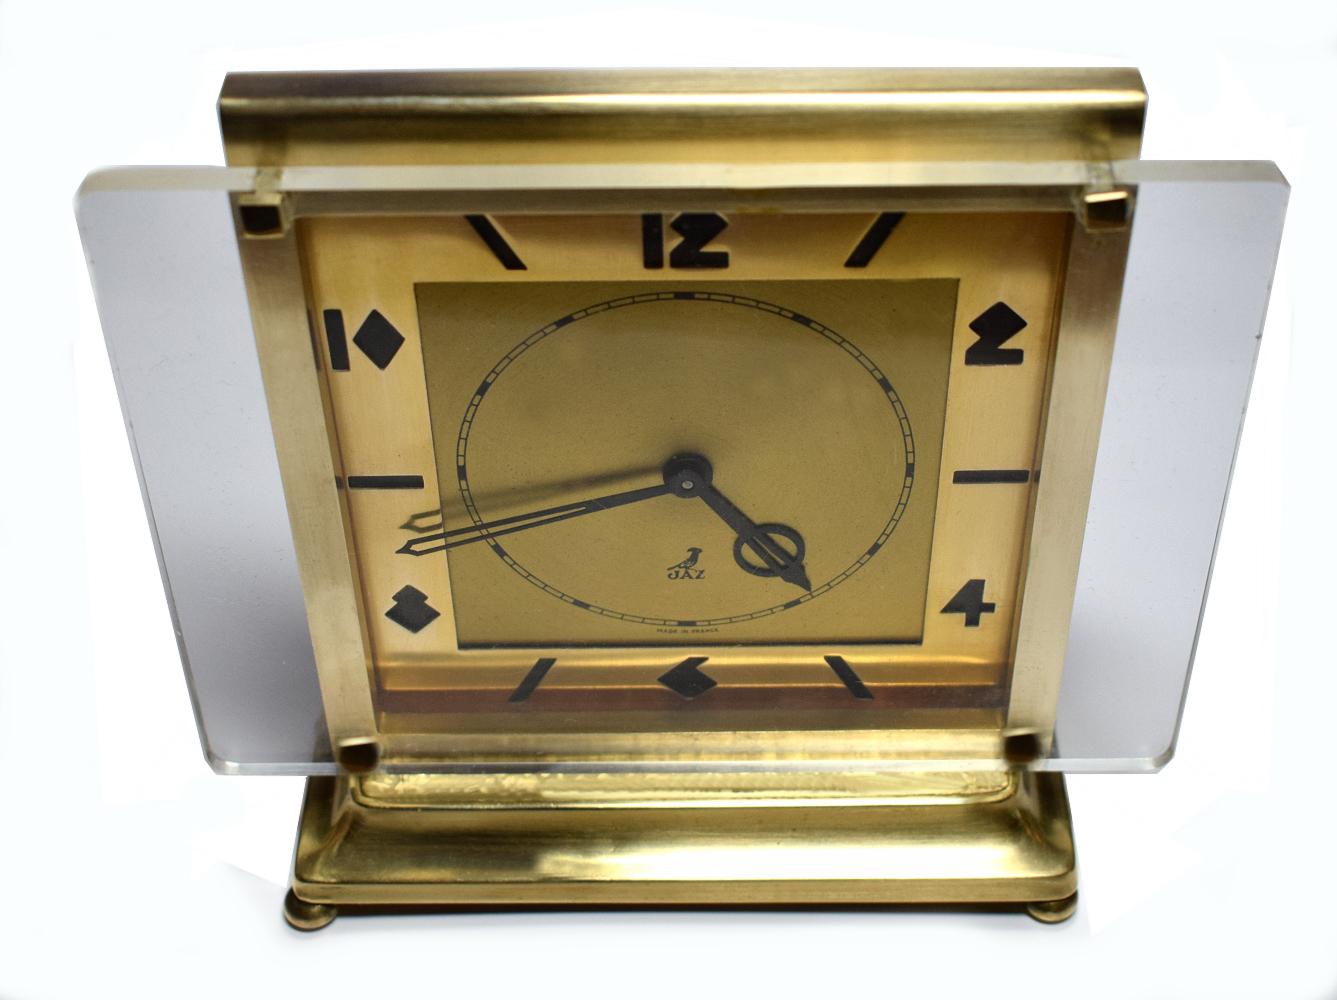 For your consideration is this wonderfully styled Art Deco 1930s French clock made by JAZ, clockmakers of France. Primarily a brass case with a Lucite front of dial. Superbly styled Deco numerals which really are the hero looks wise for this clock.